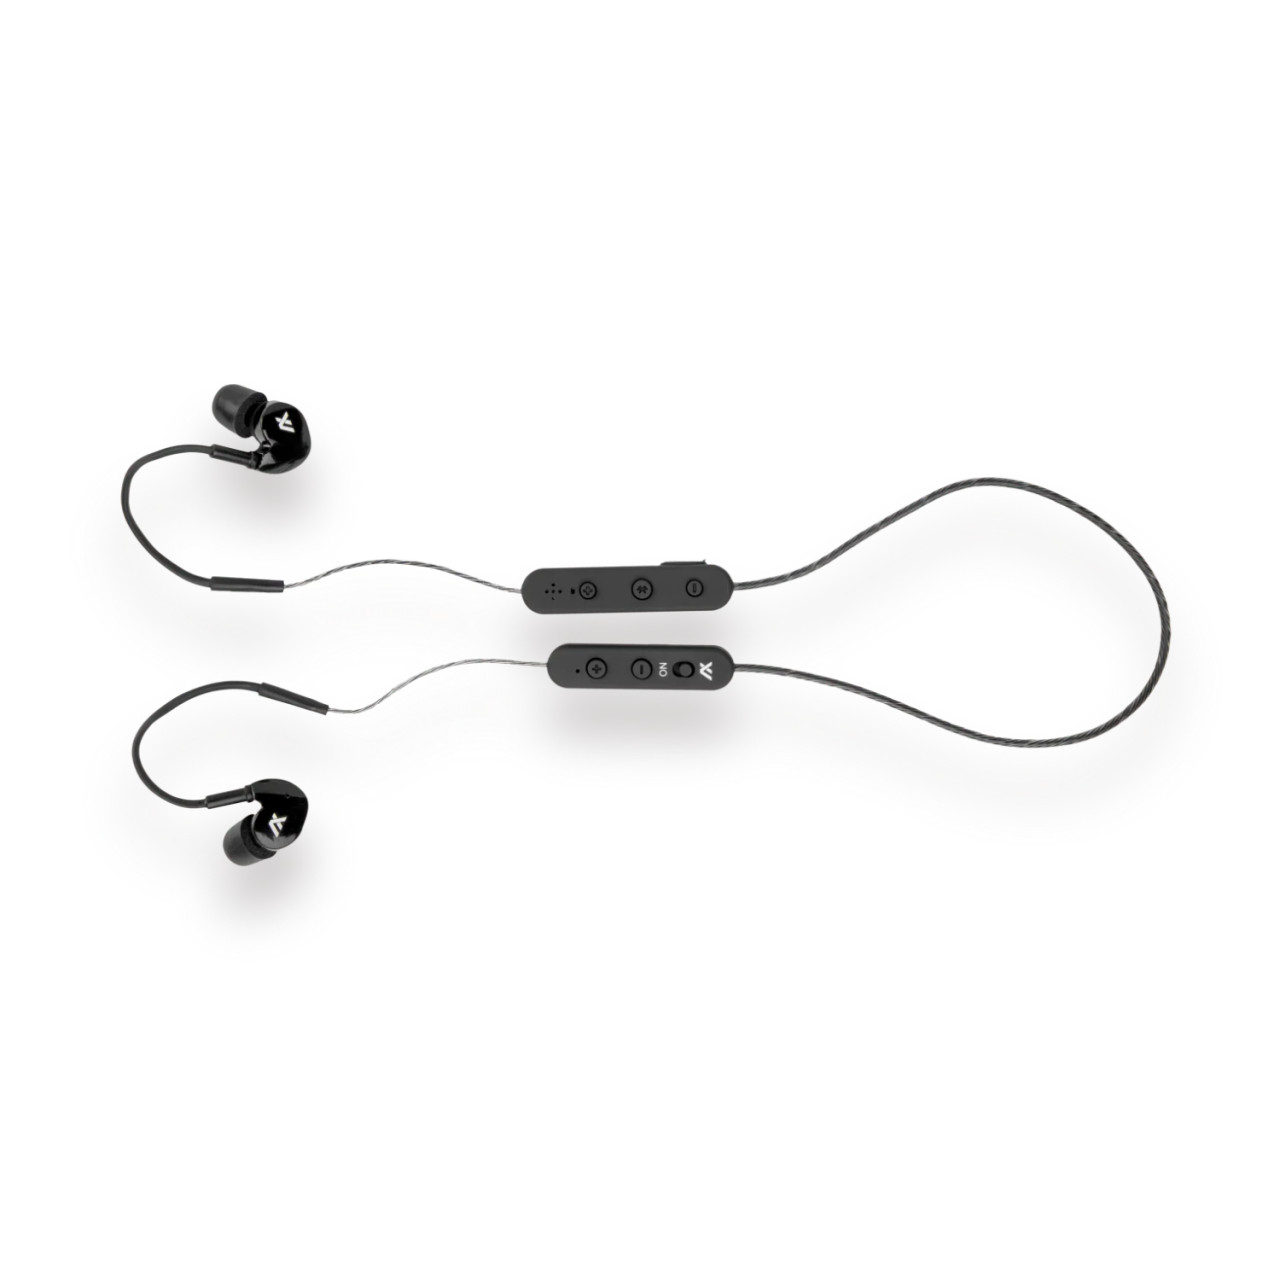 Axil GS Extreme 2.0 Ear Buds Up To 30dB